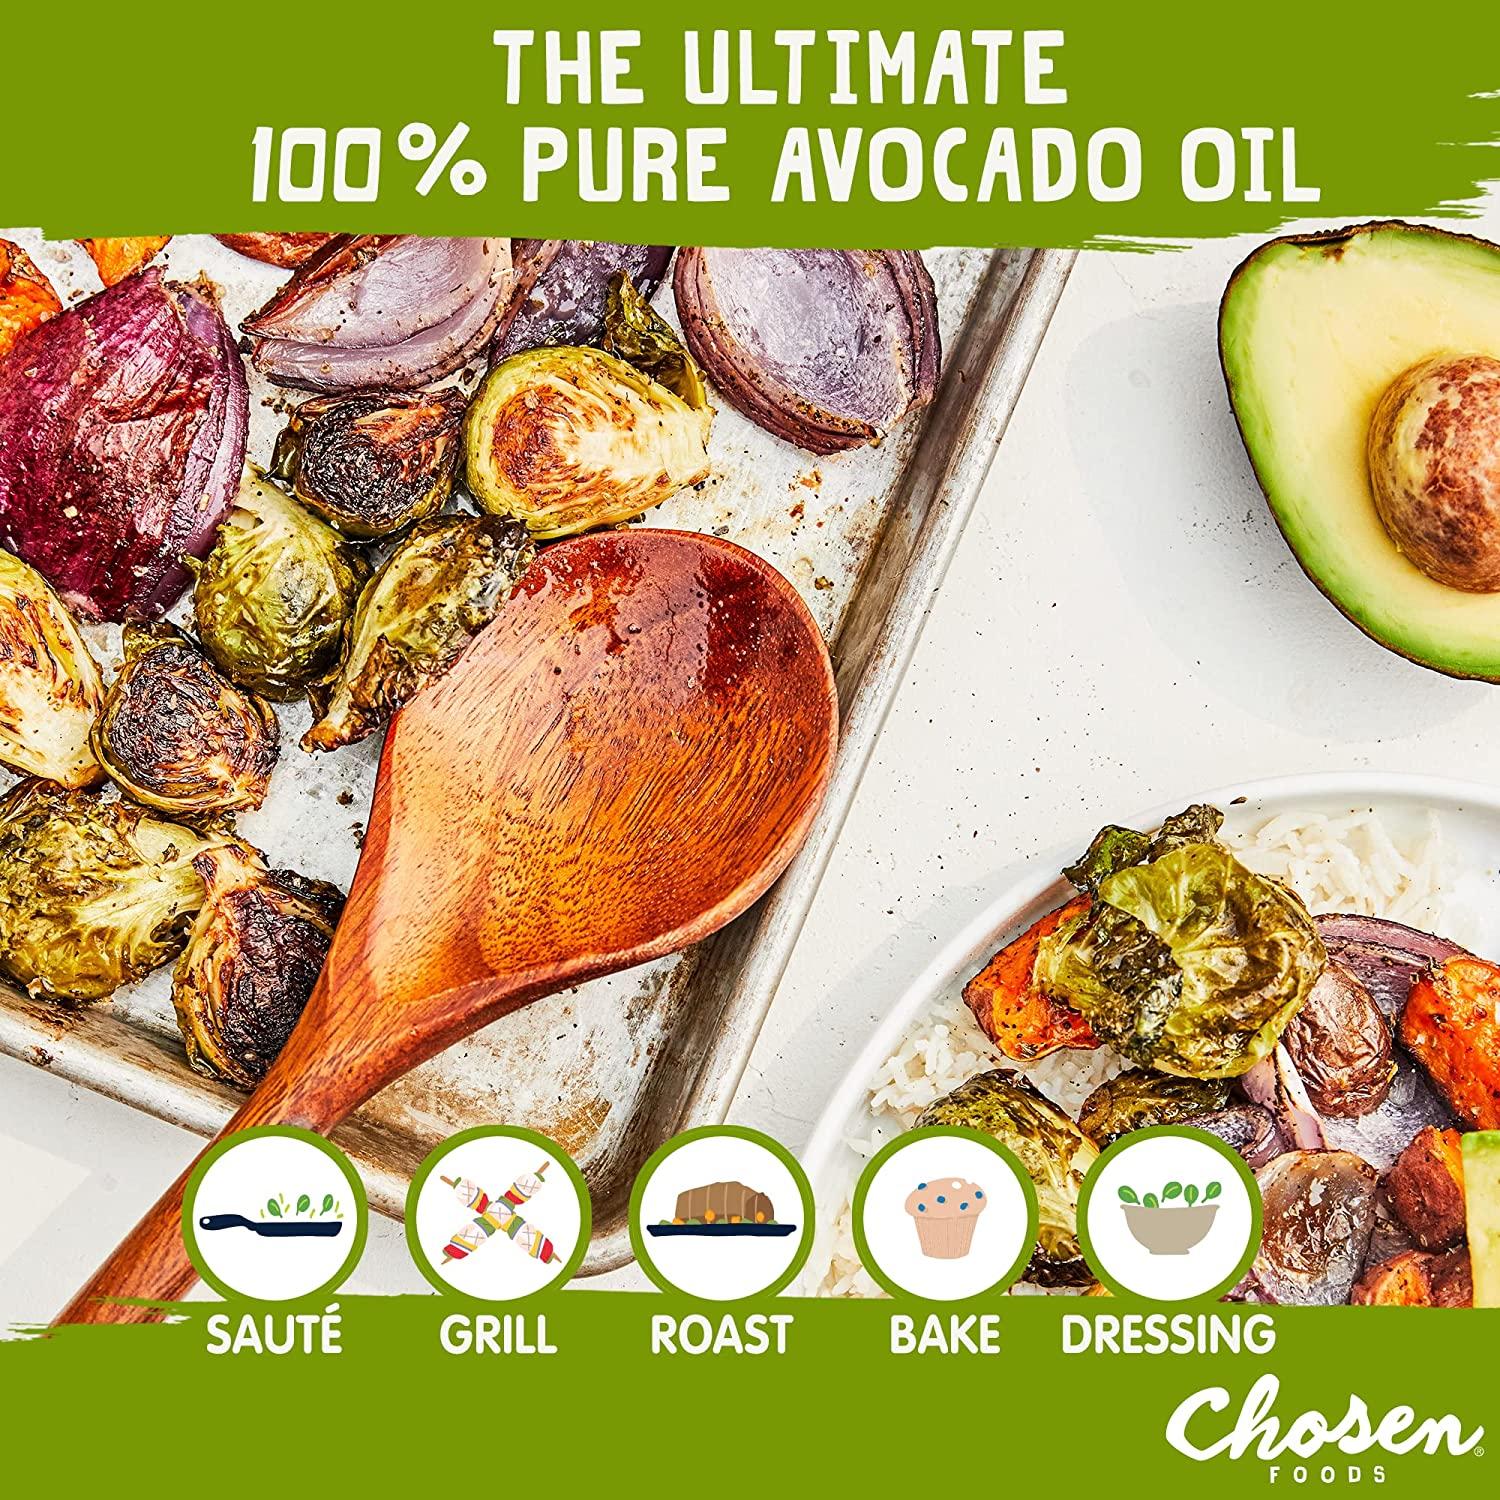  Chosen Foods 100% Pure Avocado Oil, Keto and Paleo Diet  Friendly, Kosher Oil for Baking, High-Heat Cooking, Frying, Homemade  Sauces, Dressings and Marinades (33.8 fl oz) : Grocery & Gourmet Food